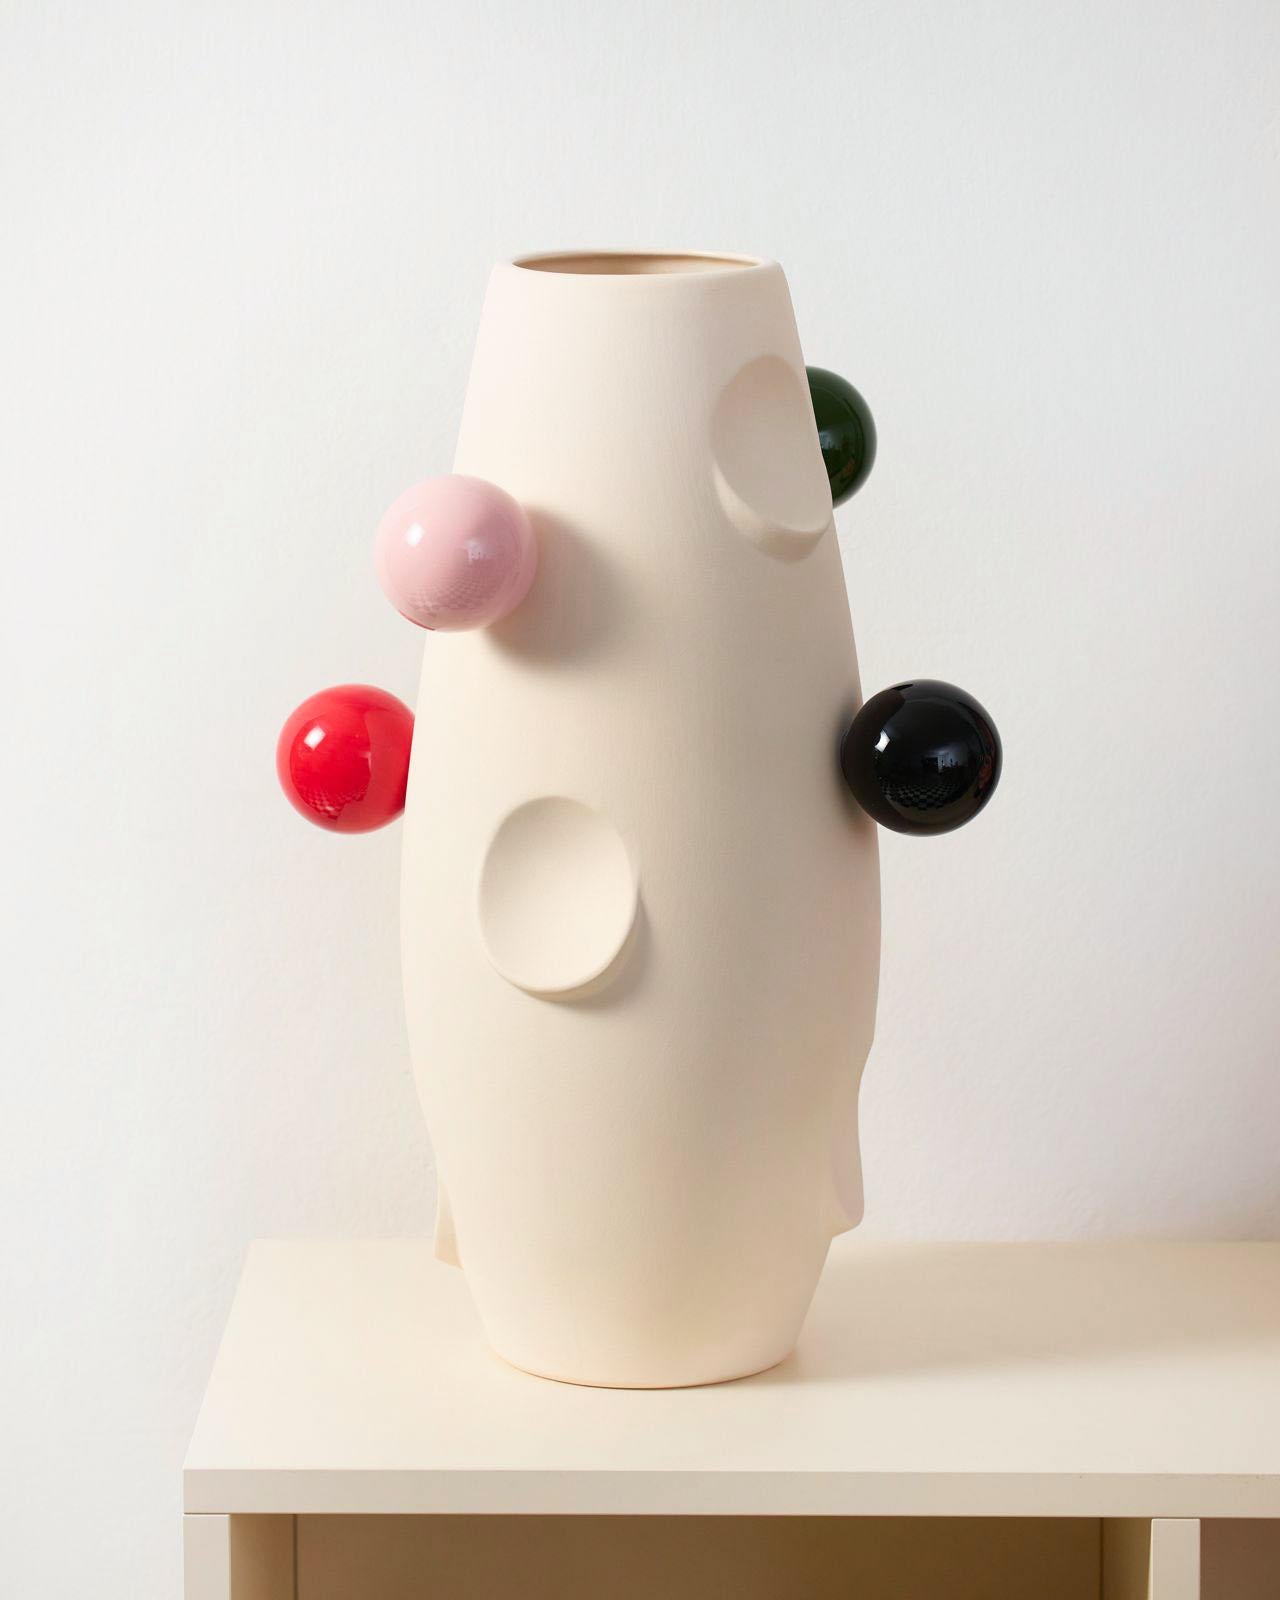 OKO Big Cyrk is a variation on the earlier OKO Cyrk vase. The balls placed on the classic OKO vase in the BIG edition have been enlarged and incorporated into the round surface of the vase.

The vase's height is 42 cm, and its diameter is 19 cm. On